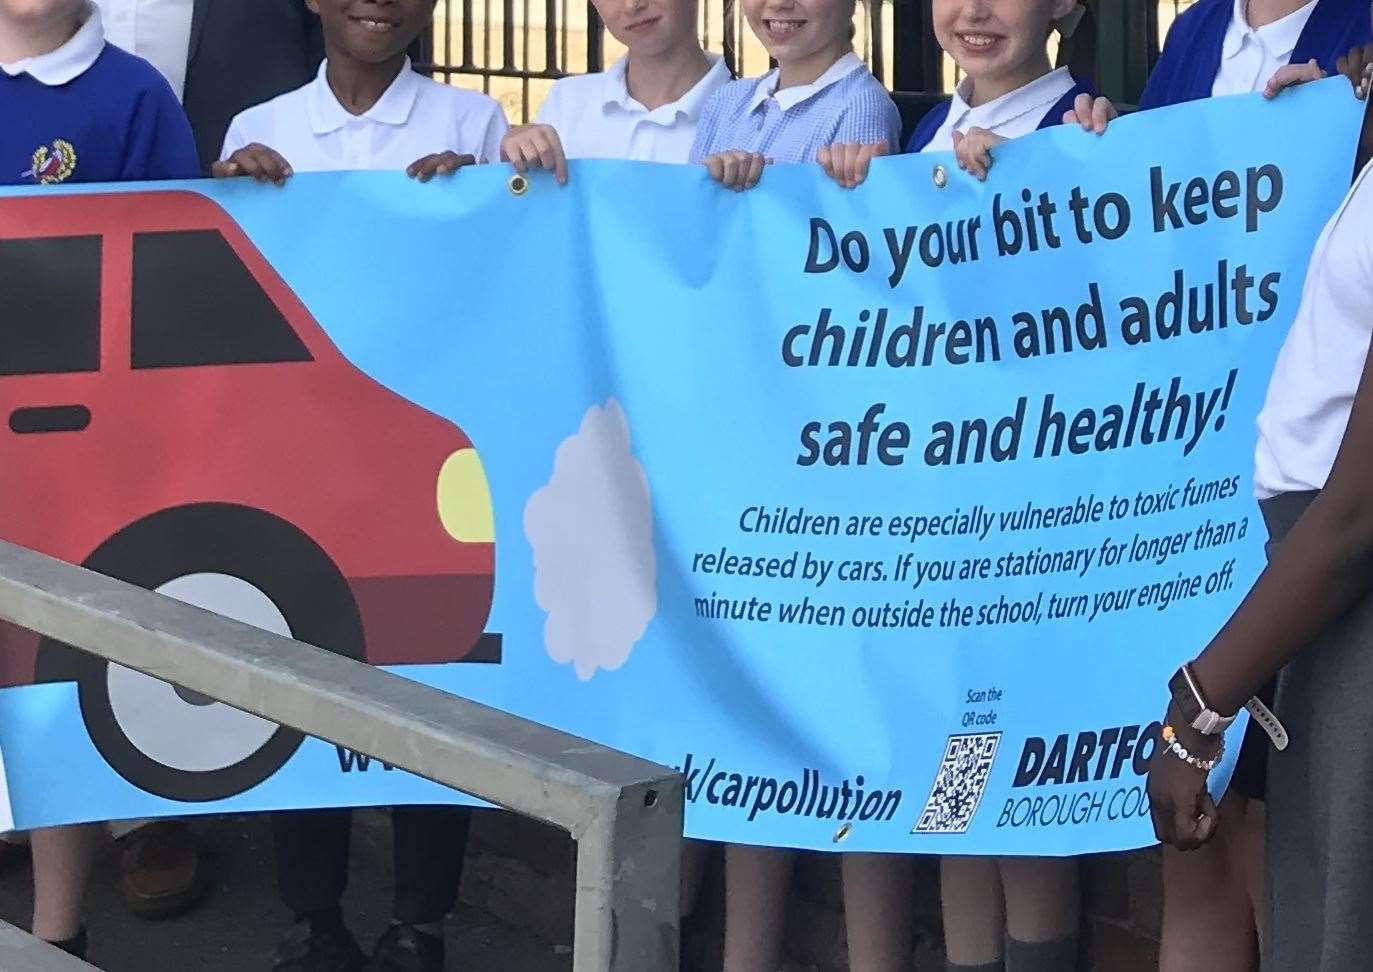 The signs read 'do your bit to keep children and adults safe and healthy'. Picture: Dartford Borough Council